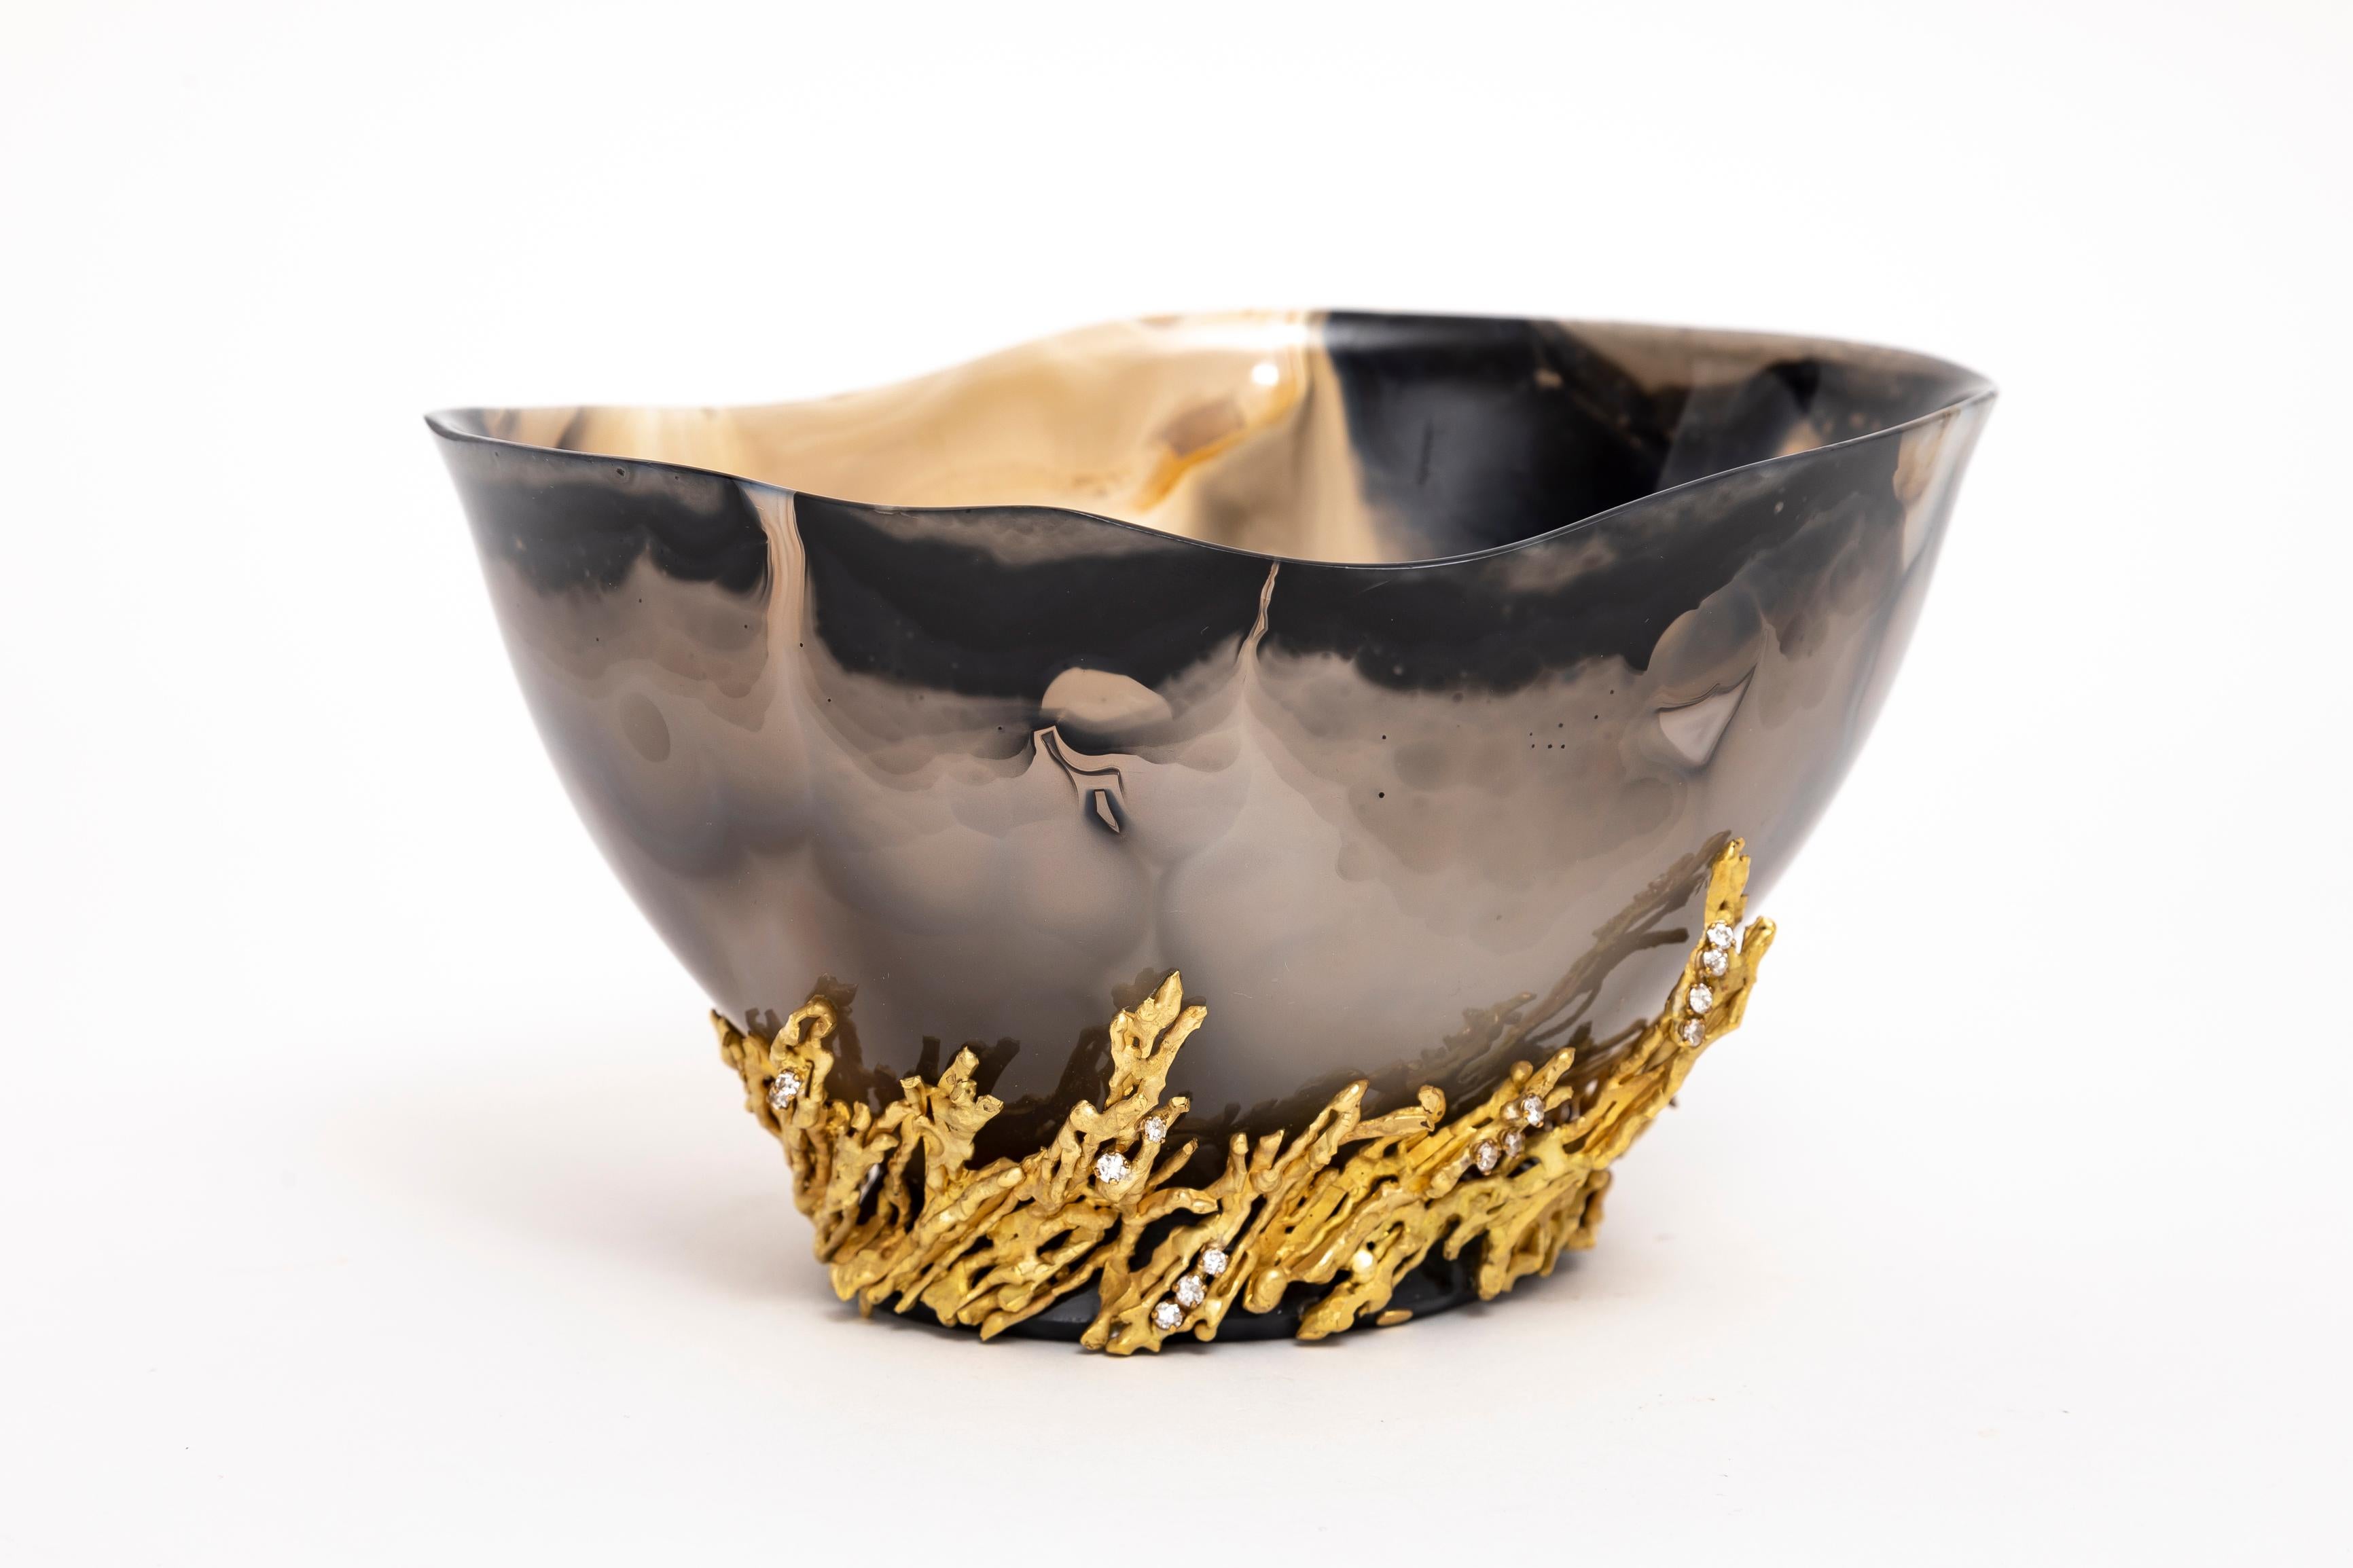 An Incredible Chaumet Paris Gold & Diamond Mounted Carved Agate Bowl In Good Condition For Sale In New York, NY